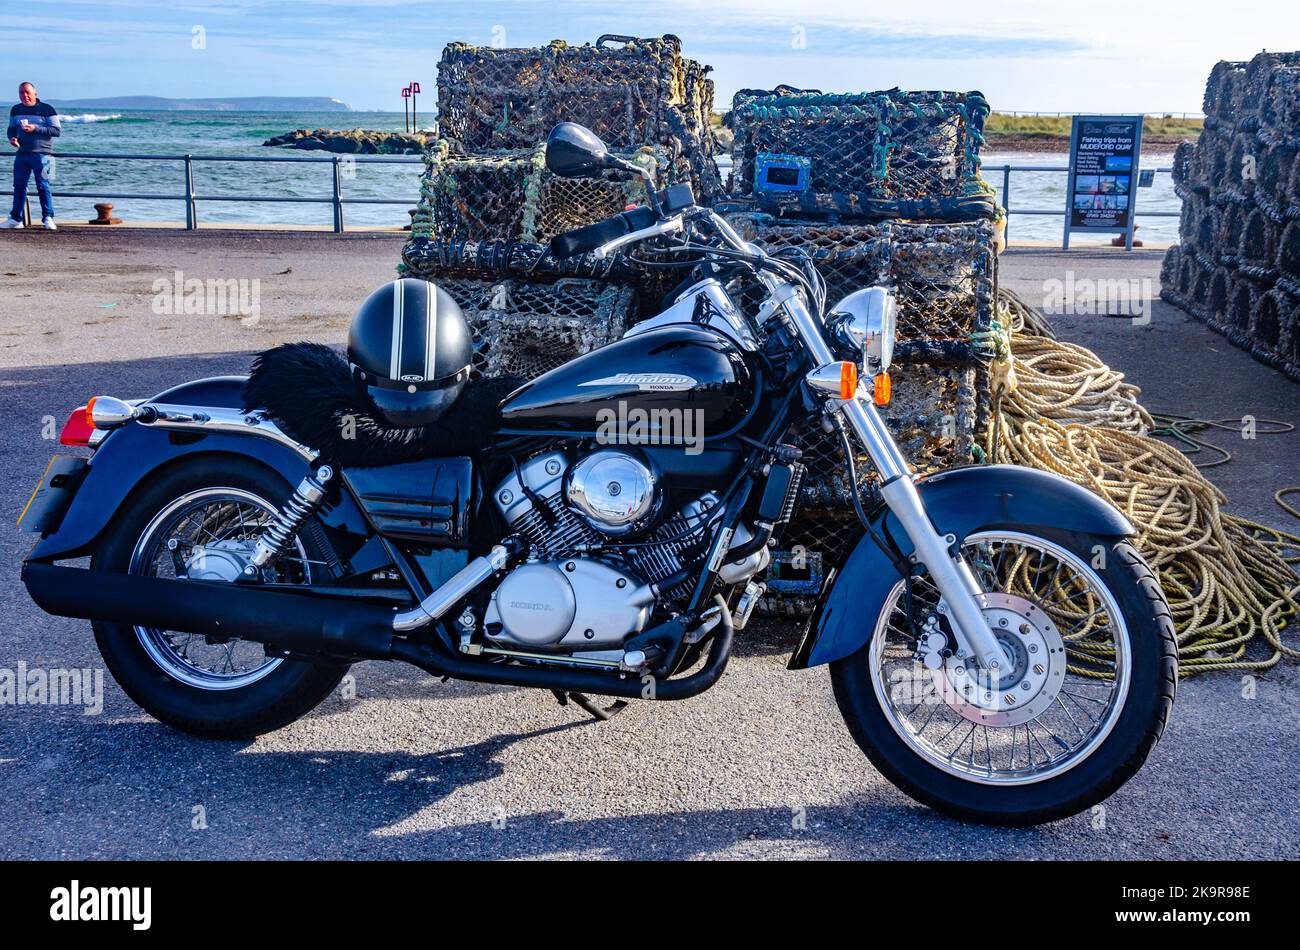 A black Honda Shadow motorbike parked in front of piles of ropes and lobster pots on the quayside at Mudeford near Christchurch in Dorset, UK Stock Photo